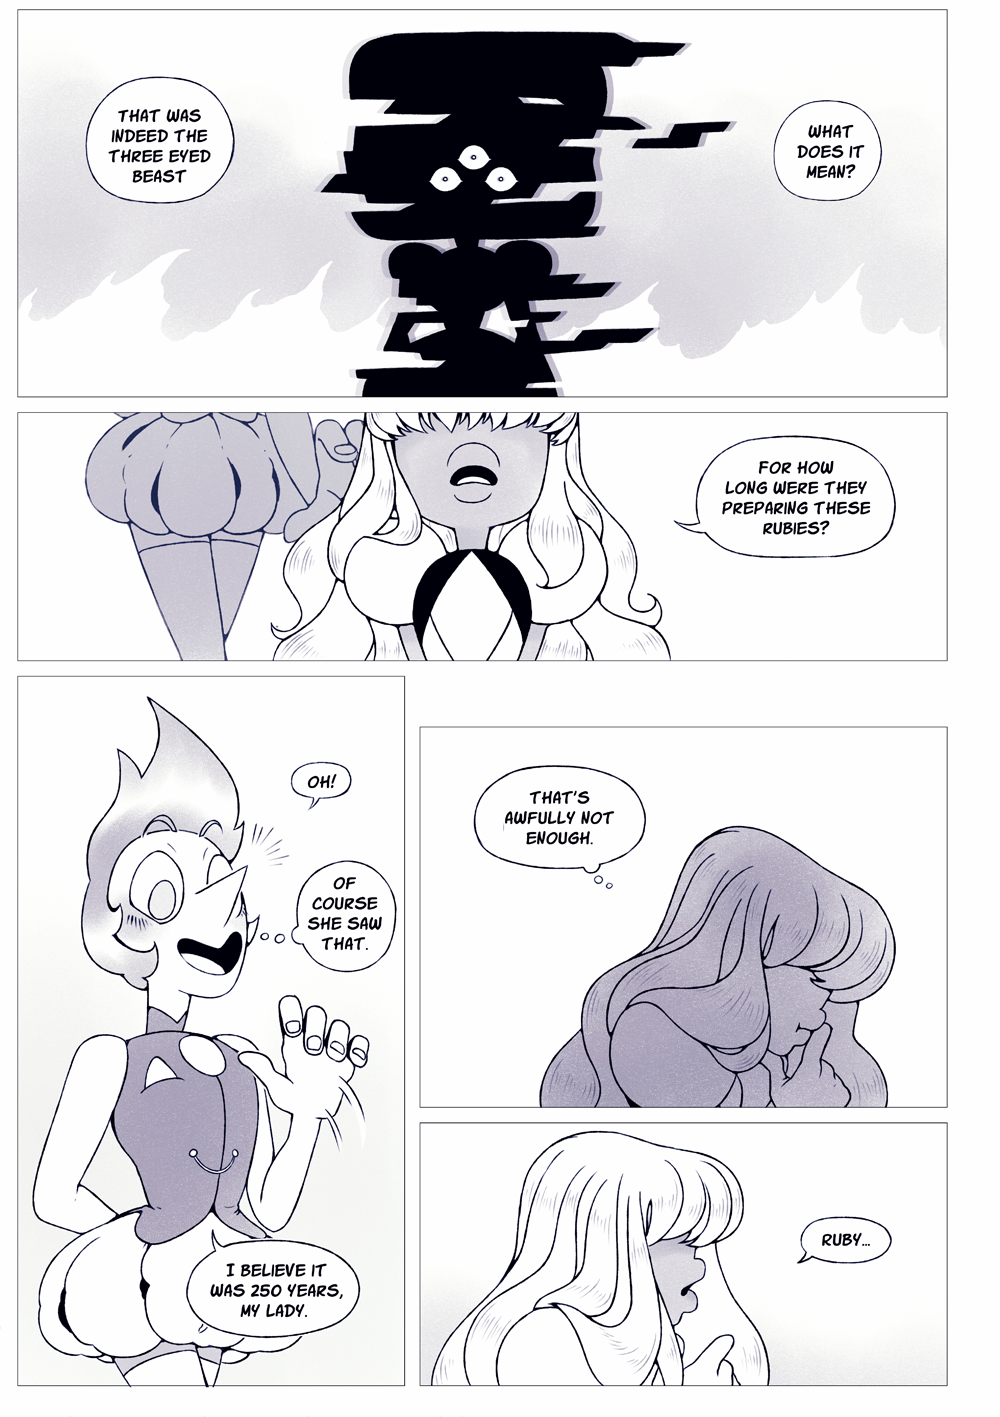 weirdlyprecious:  The three-eyed beastpage 6As I mentioned before, in this AU Sapphire